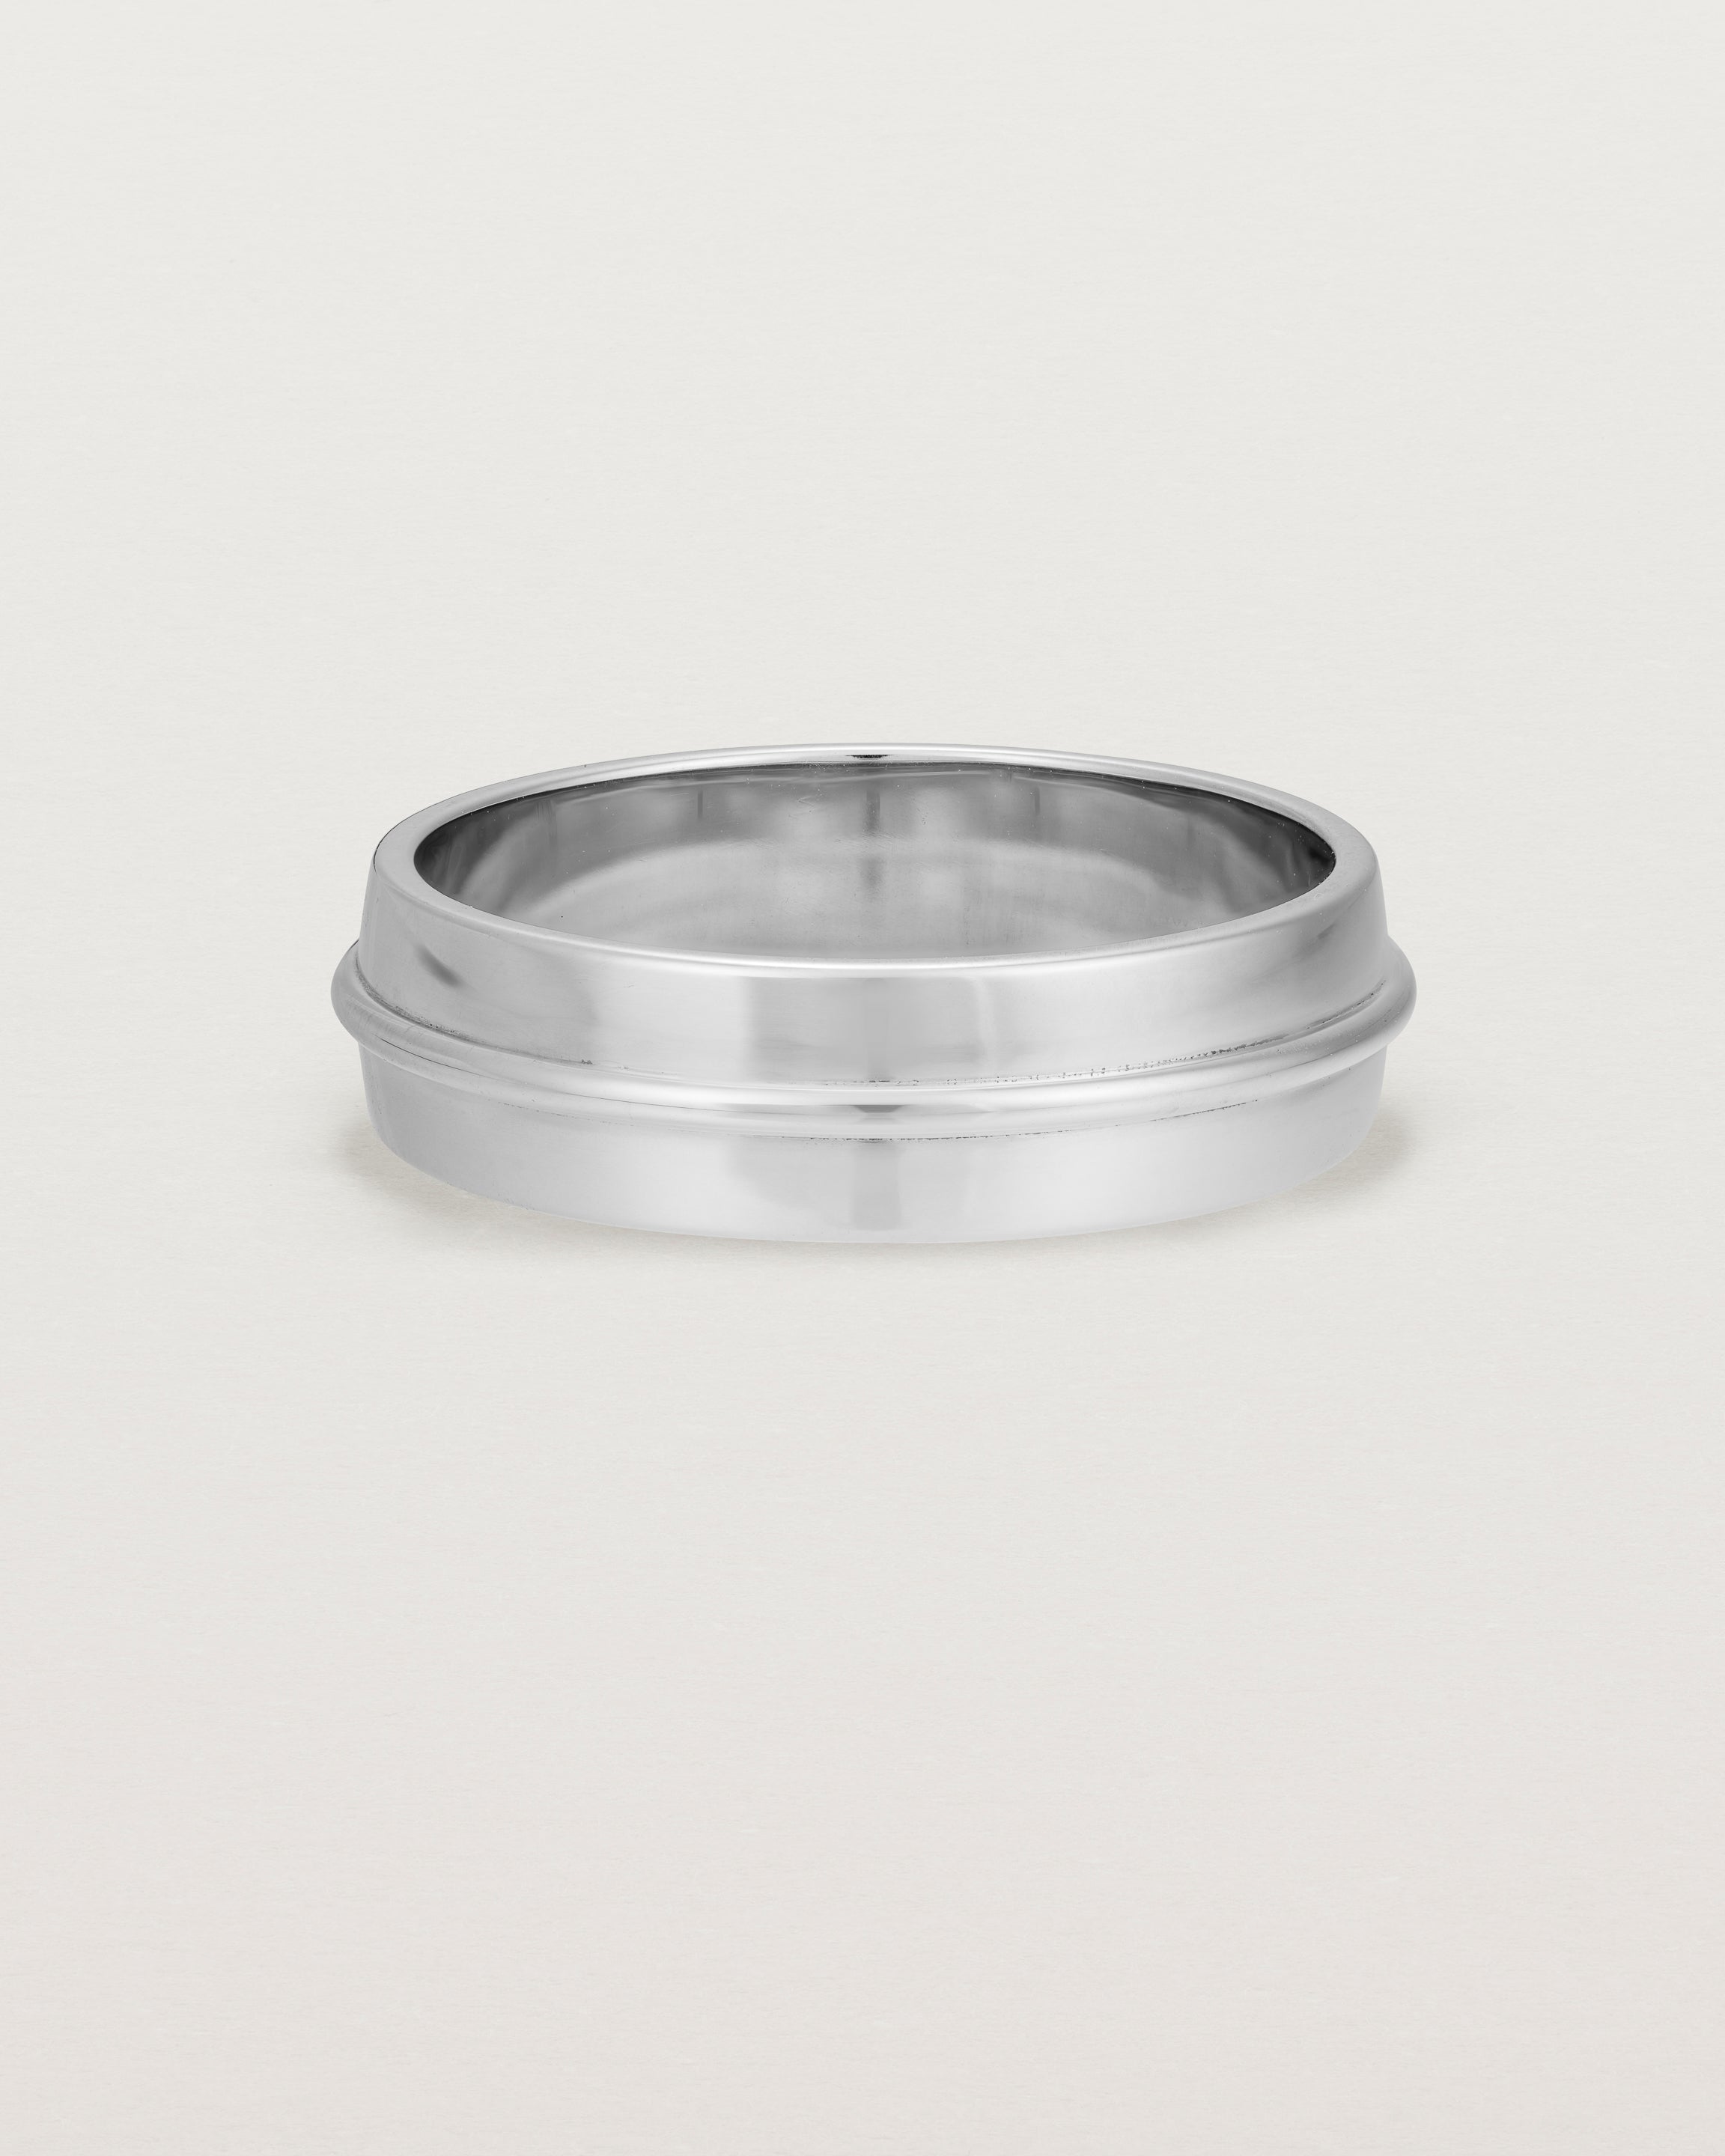 Front view of the Seam Wedding Ring | 6mm | White  Gold.